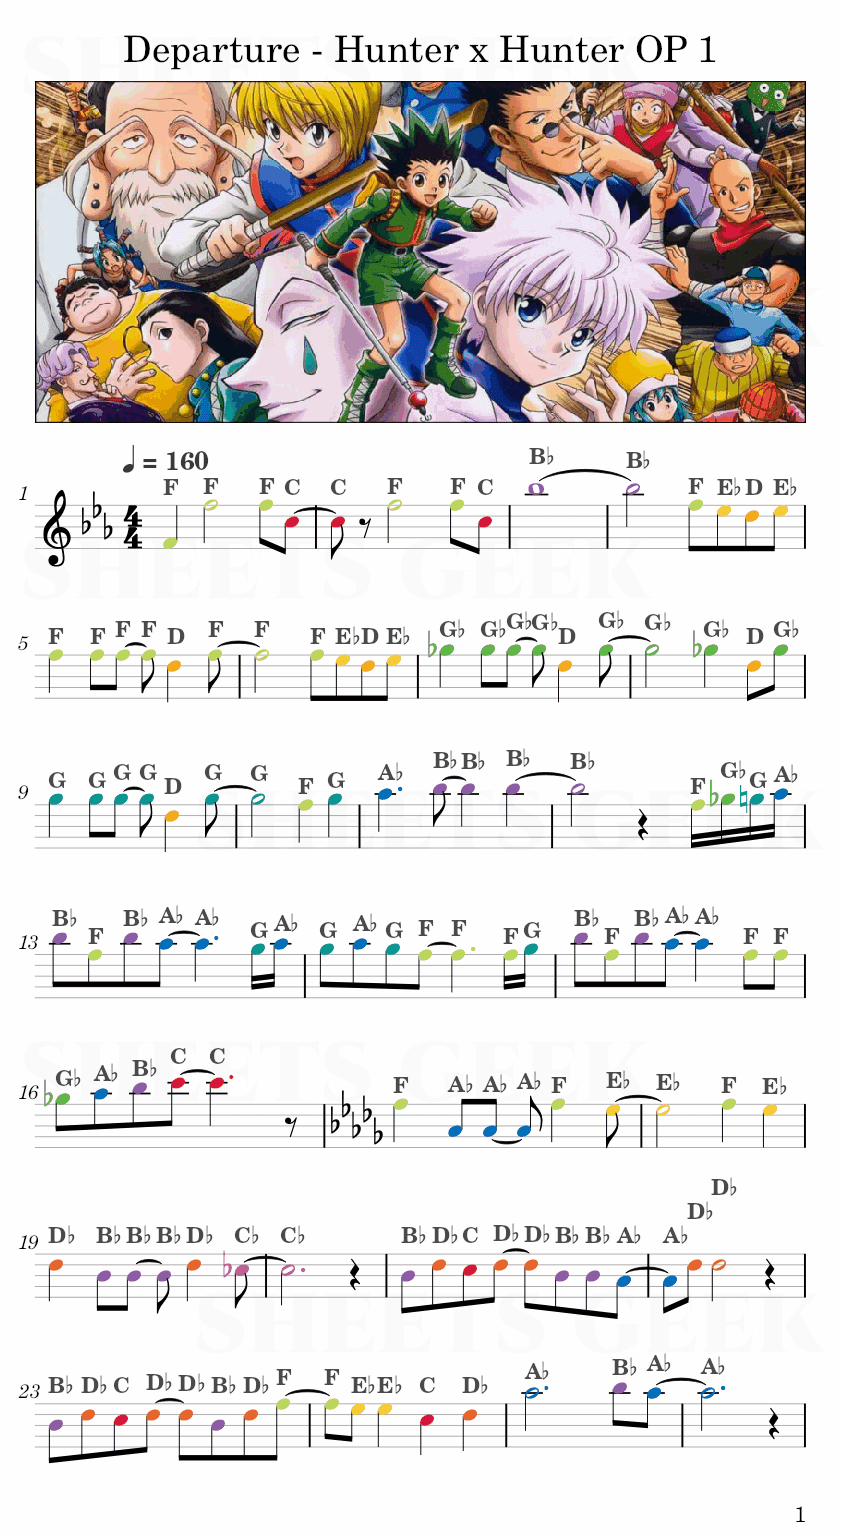 Departure - Hunter x Hunter OP 1 Easy Sheets Music Free for piano, keyboard, flute, violin, sax, celllo 1